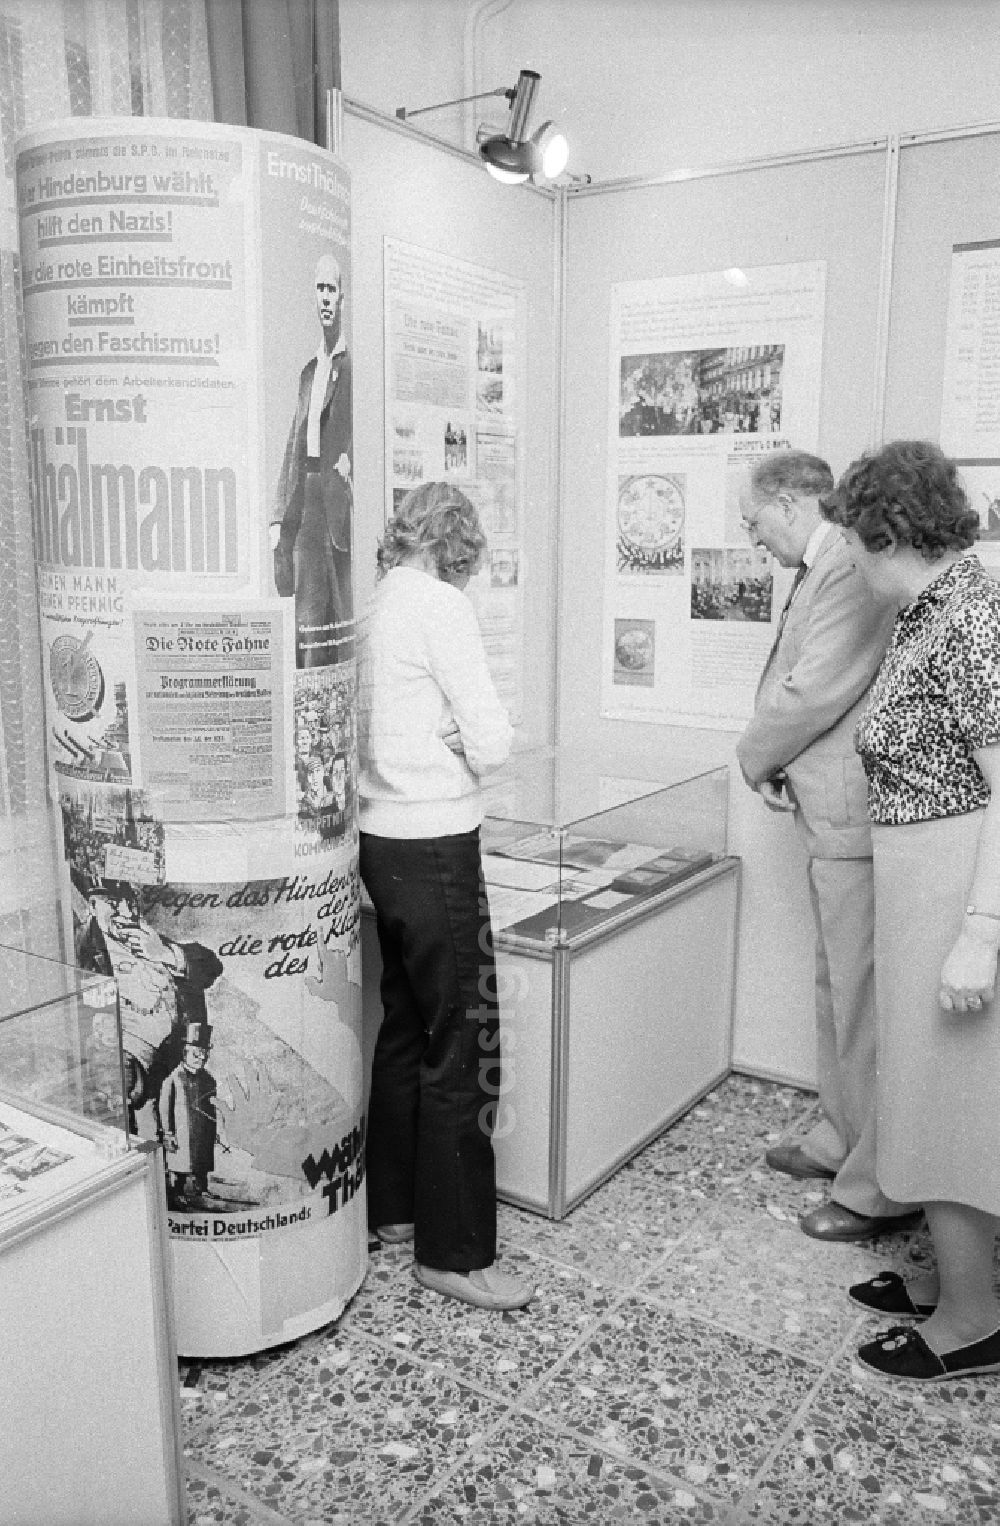 GDR image archive: Berlin - Opening of the history cabinet of today's House of Liberation in Leninallee, today's Landsberger Allee 563 in the district Marzahn in Berlin, the former capital of the GDR, German Democratic Republic. Visitors in front of a display case with exhibits and historical information